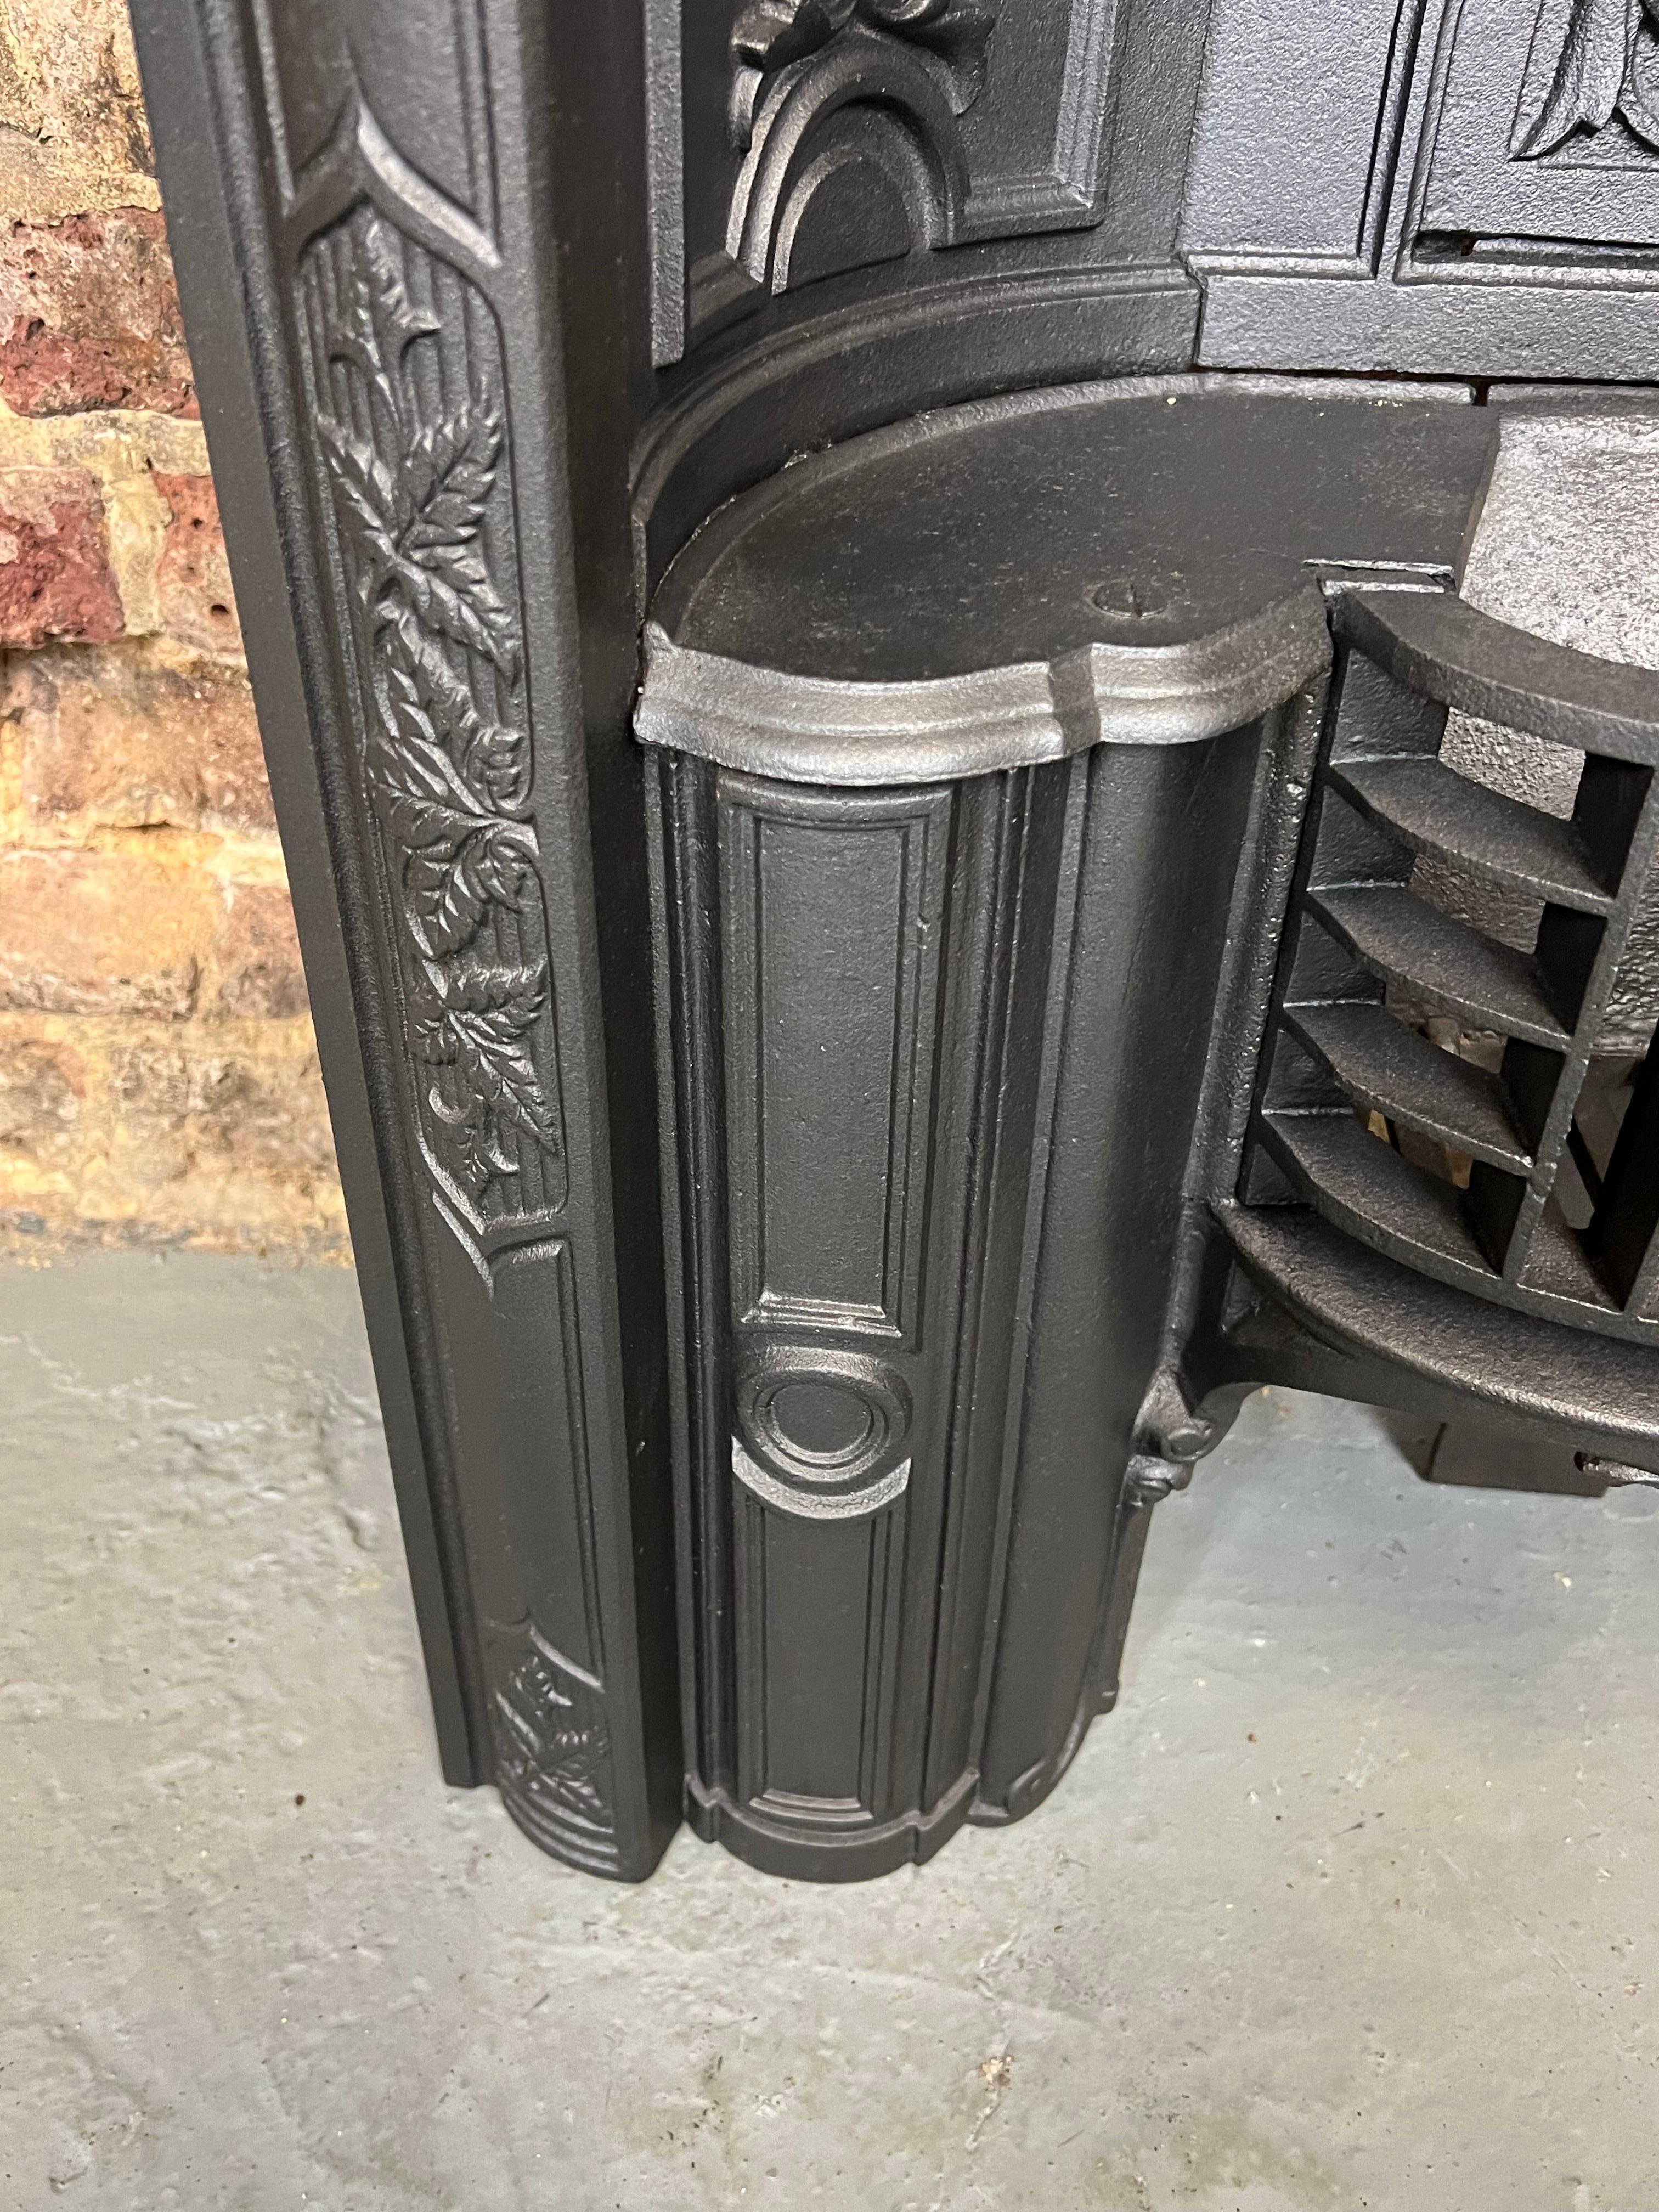 19th Century cast iron fireplace insert
also known as a Victorian arched hob grate.
English made with detailed curved recessed panels, classic floral decorative detailing to the arch, flap and side return panels.
In good condition. Blackened lead